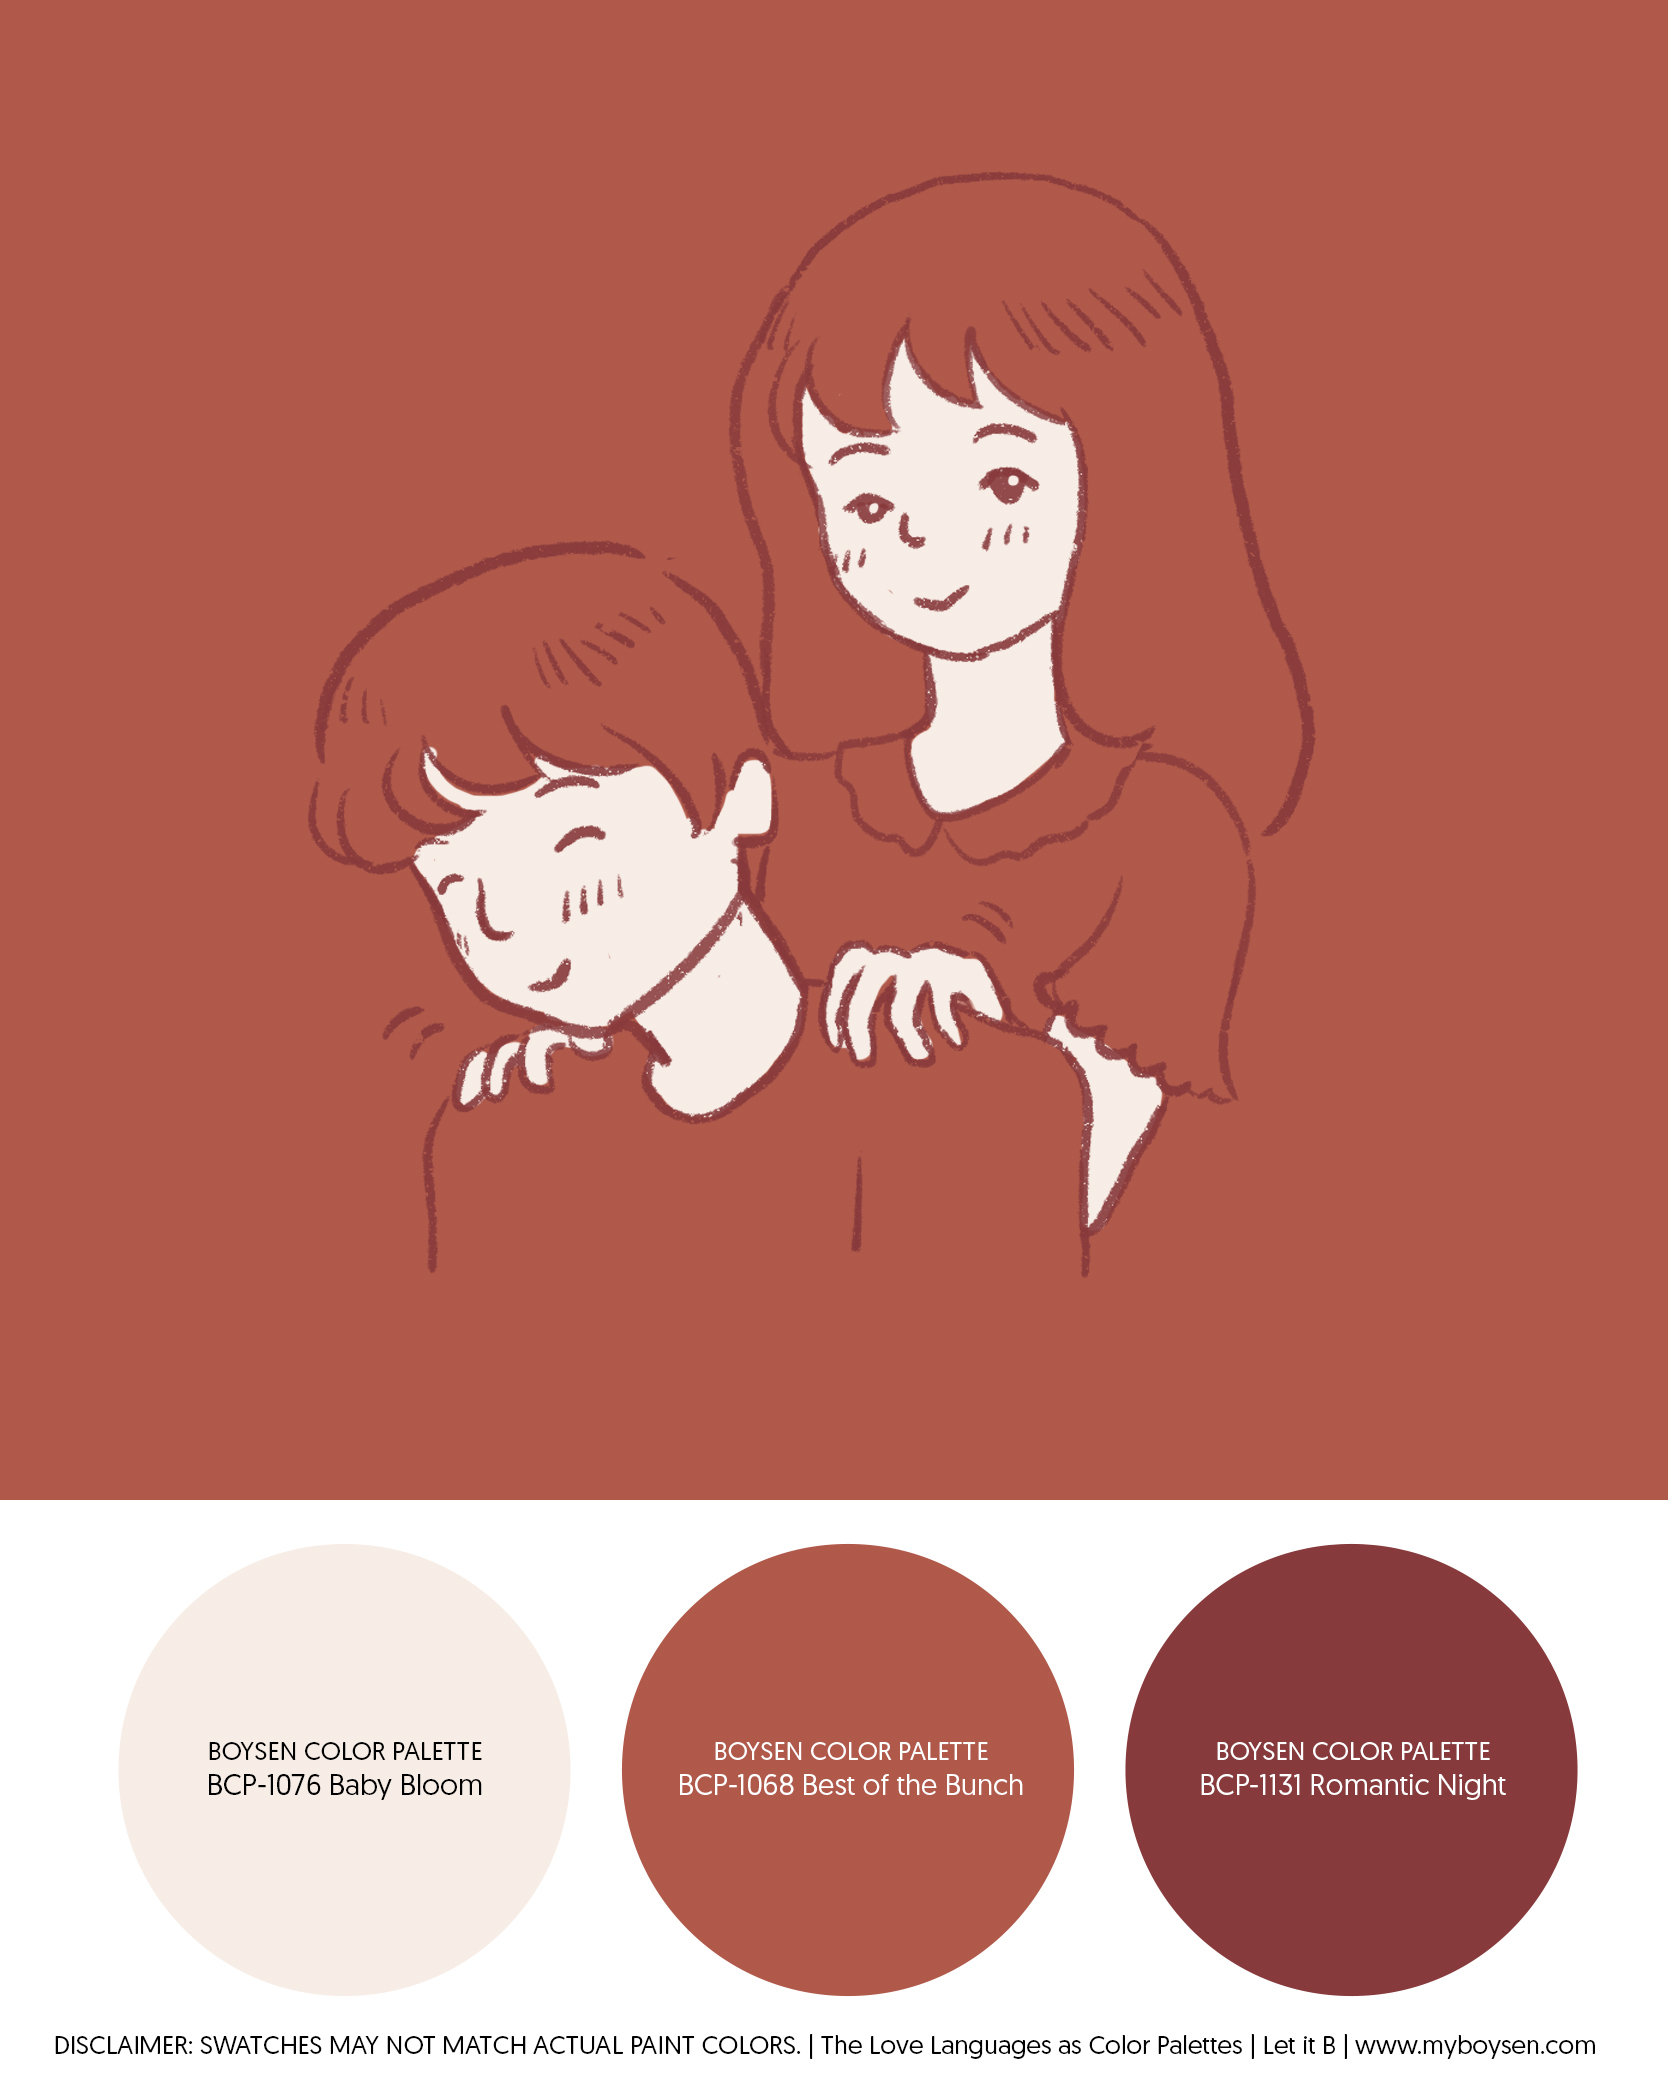 The Love Languages as Color Palettes | MyBoysen